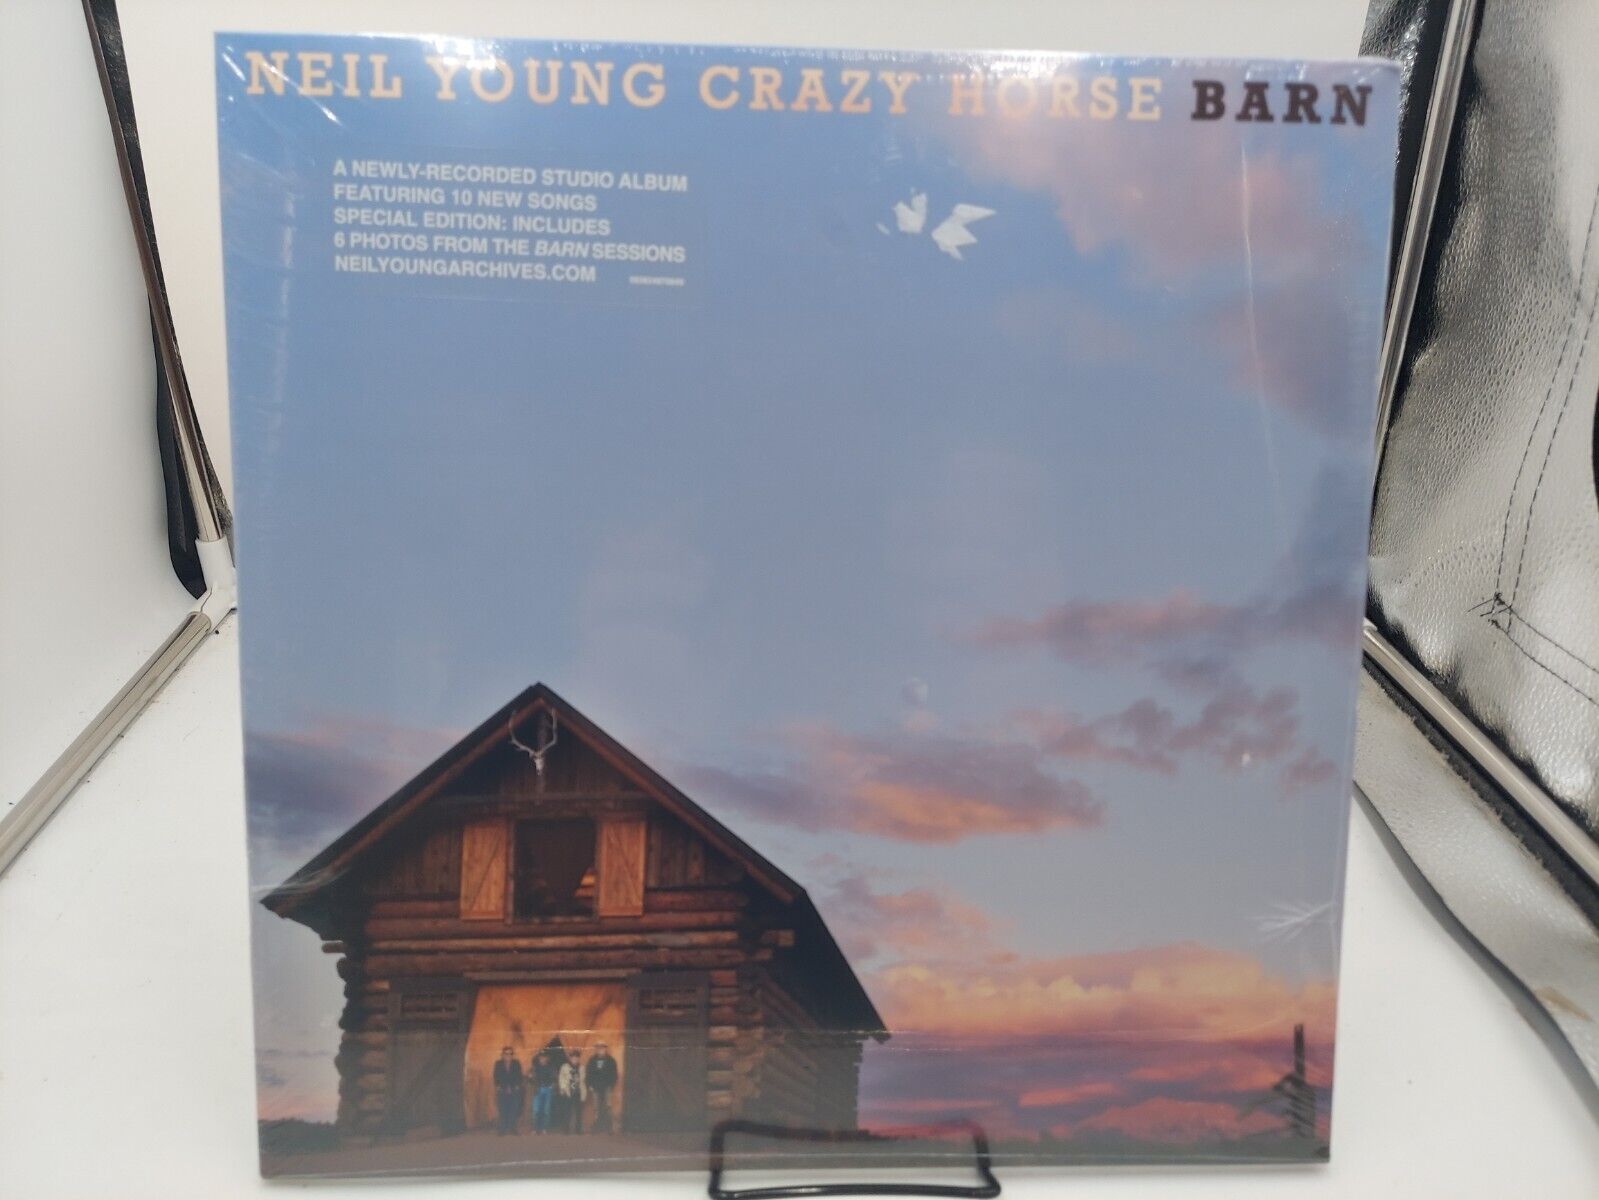 Neil Young Crazy Horse Barn LP Record 2021 SEALED Record Mint